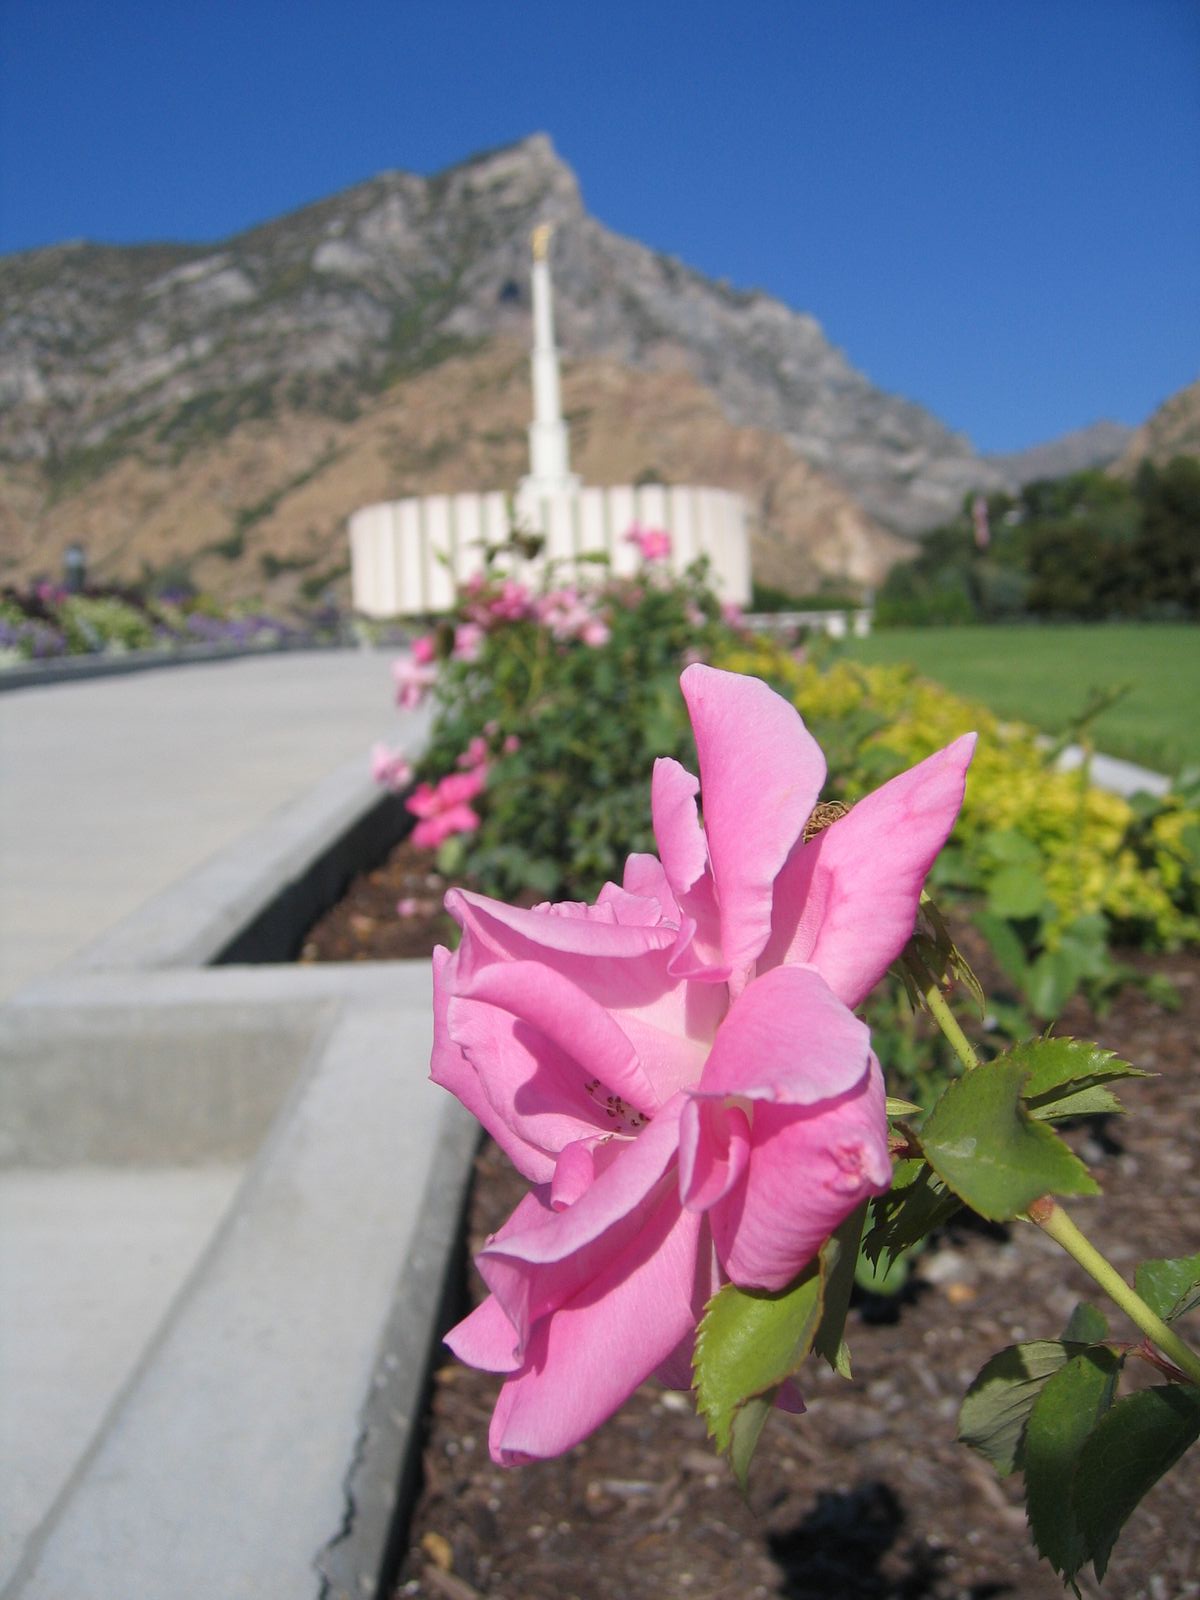 Flower at the Provo Temple